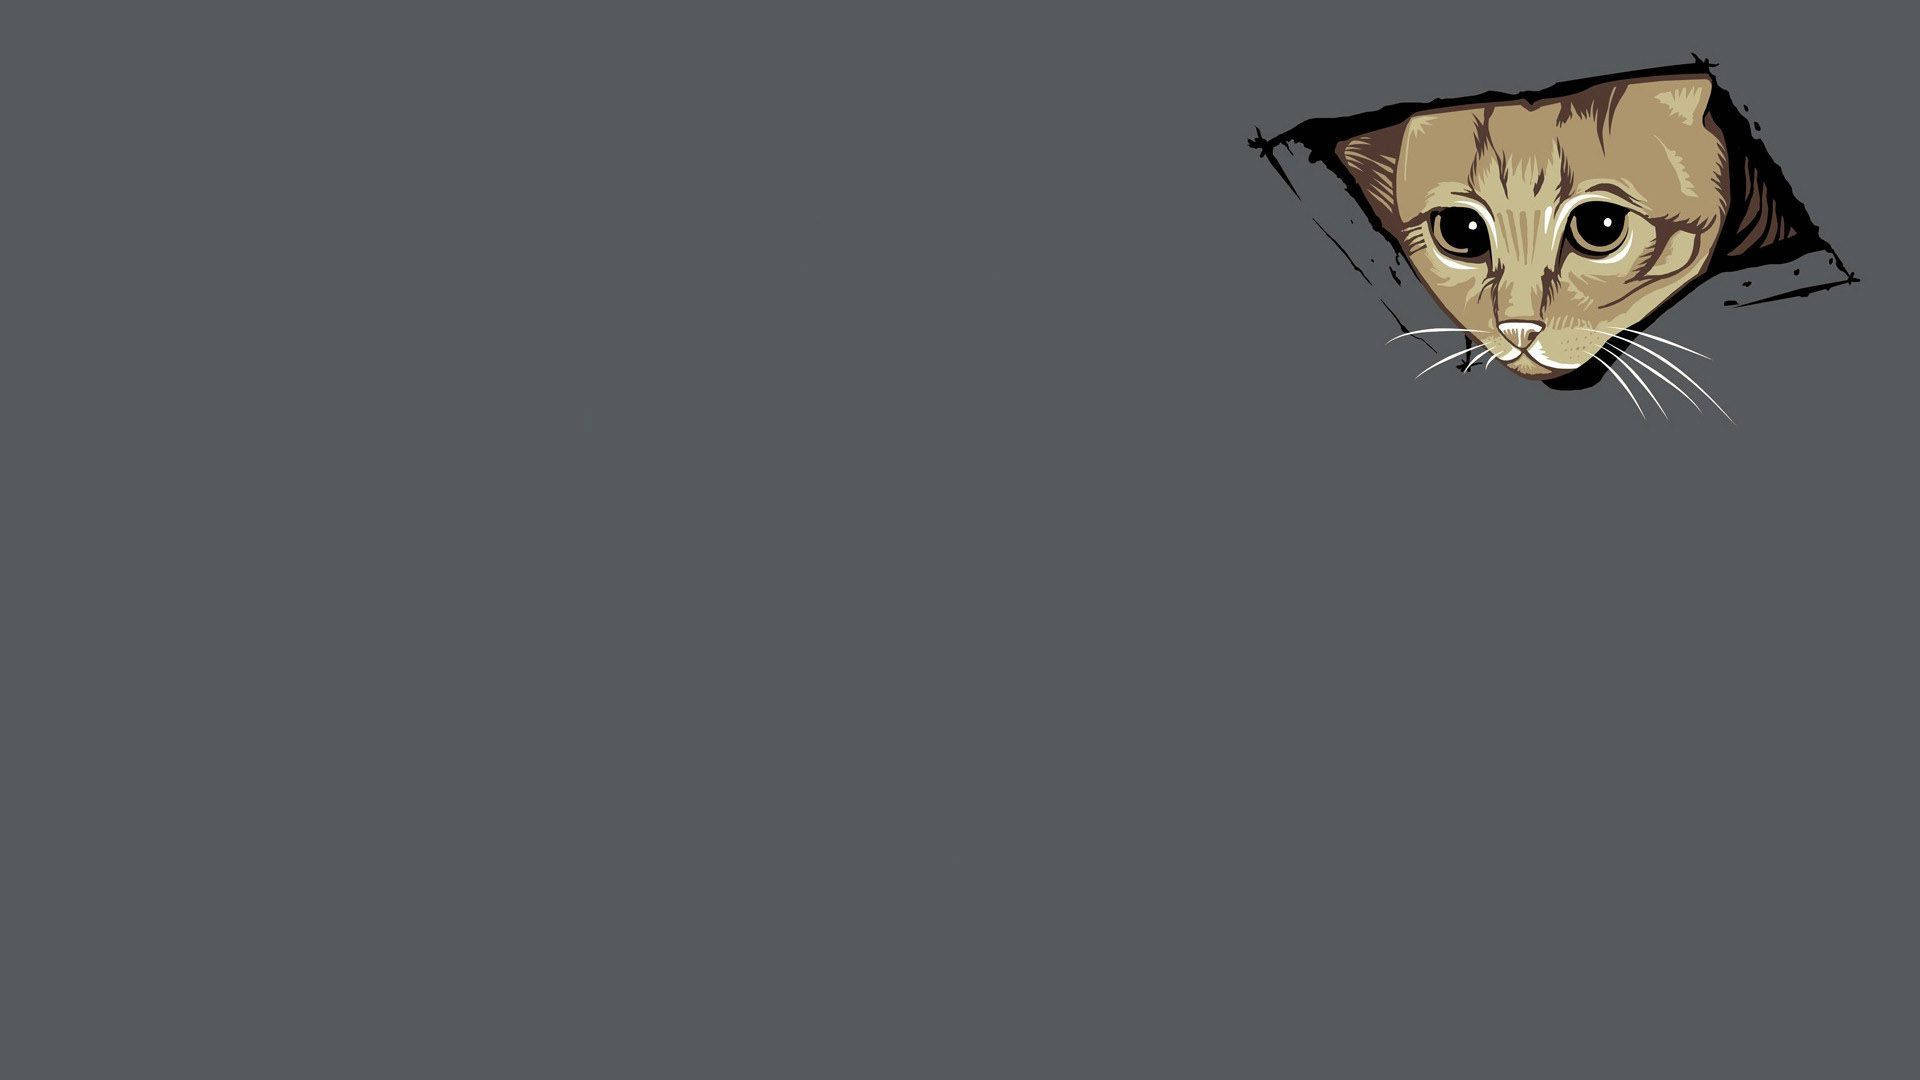 When you try to find a way out of a situation, but your ceiling cat meme won’t budge Wallpaper